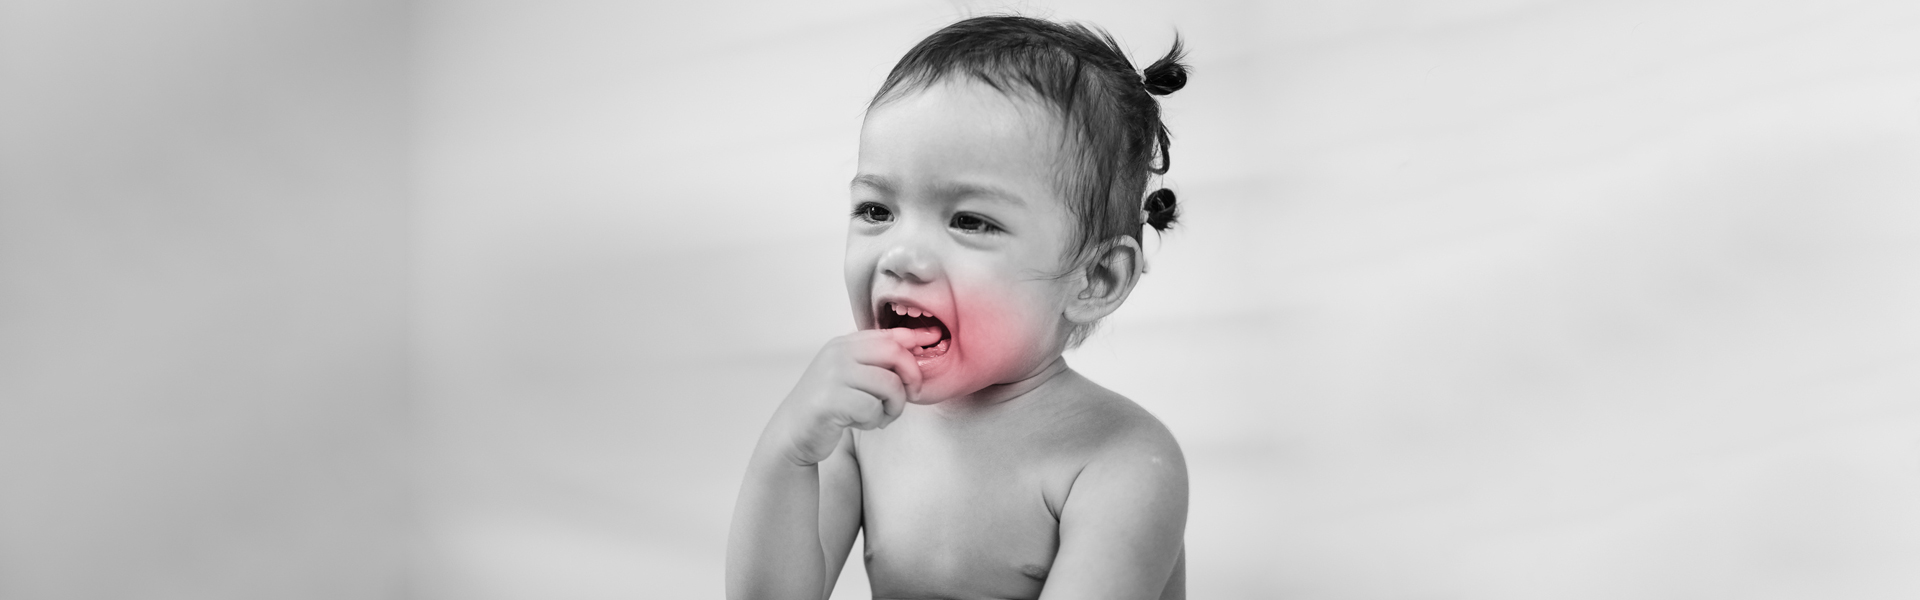 Common Children’s Tooth Injuries that Happen at Home